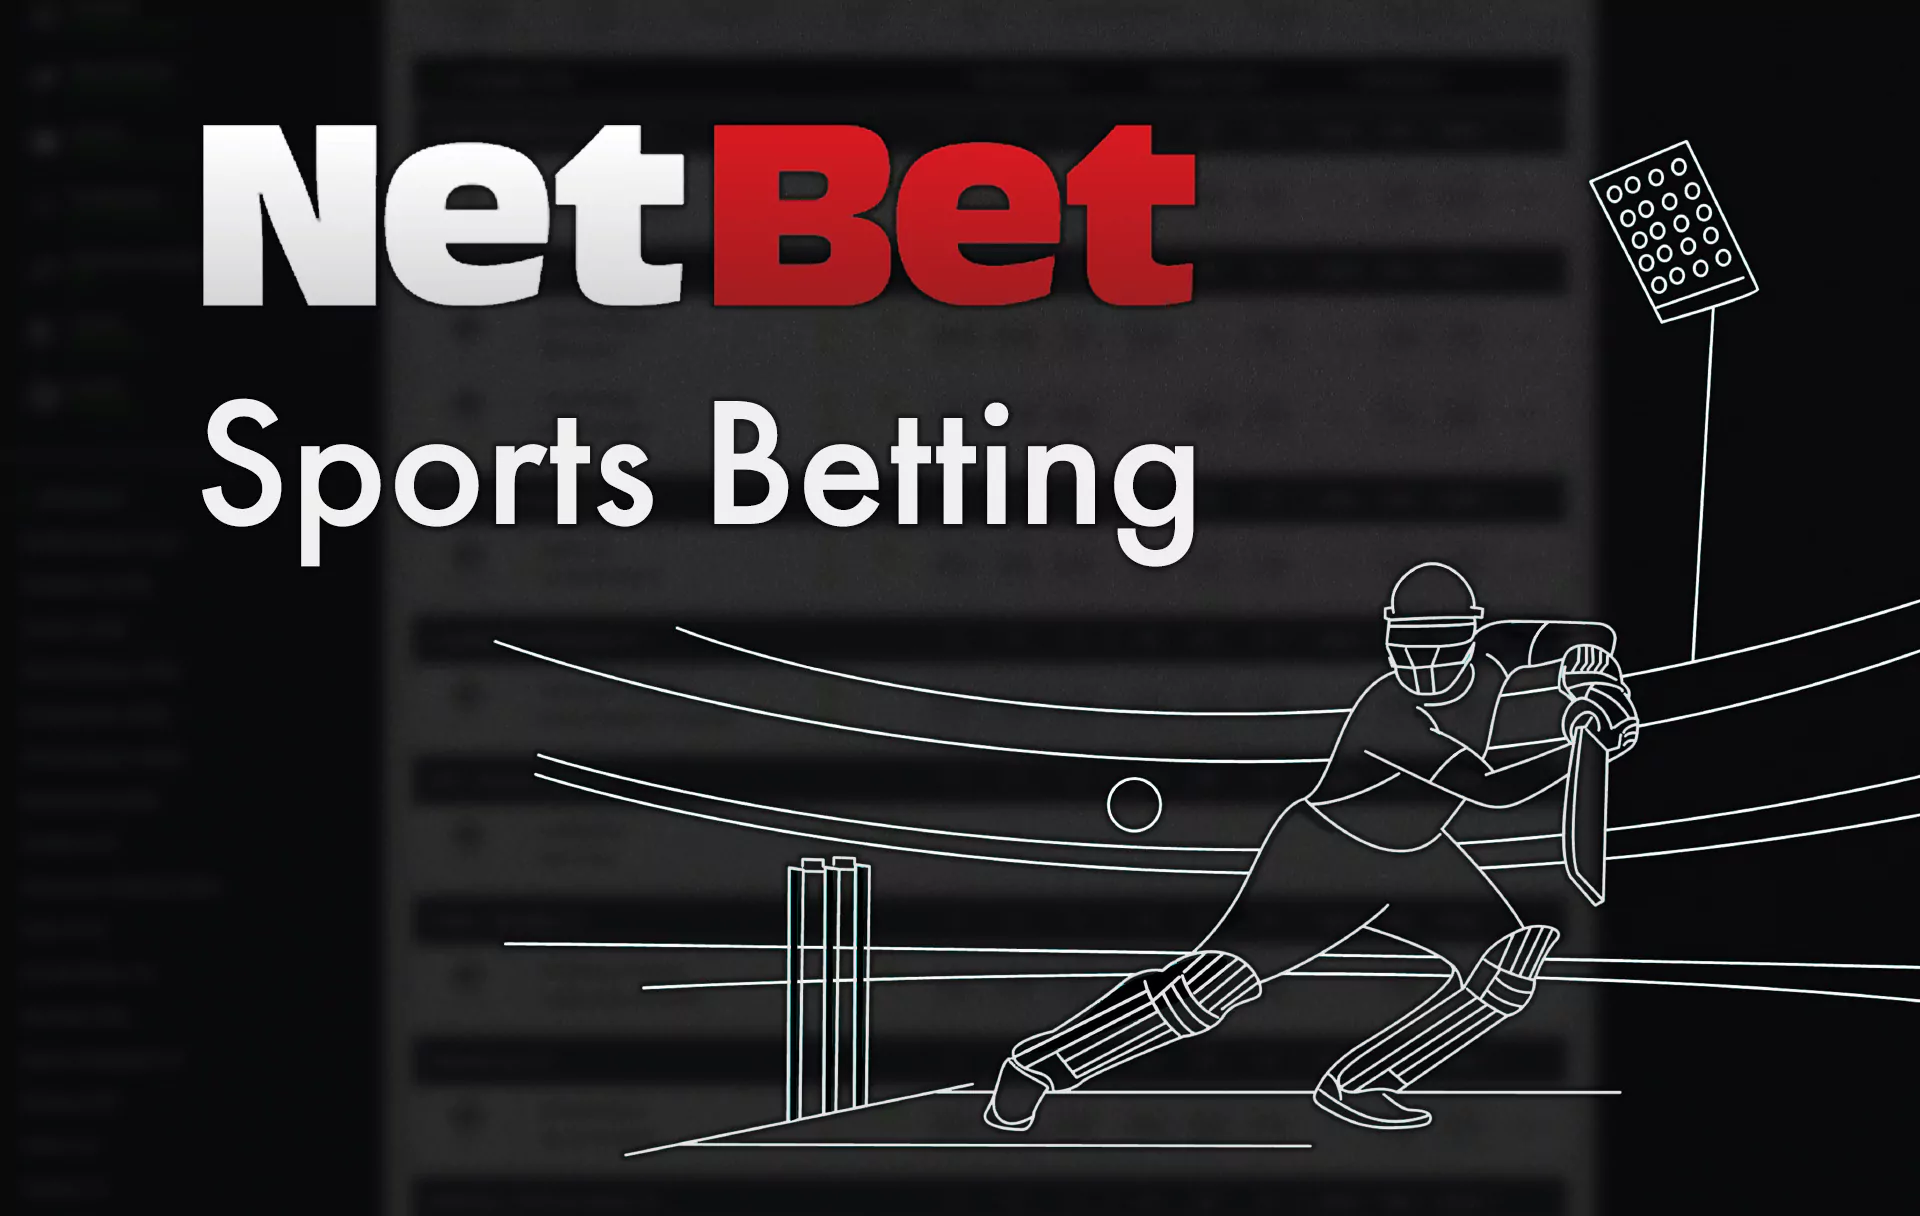 On the Netbet site, you also find a section for betting on sports events.